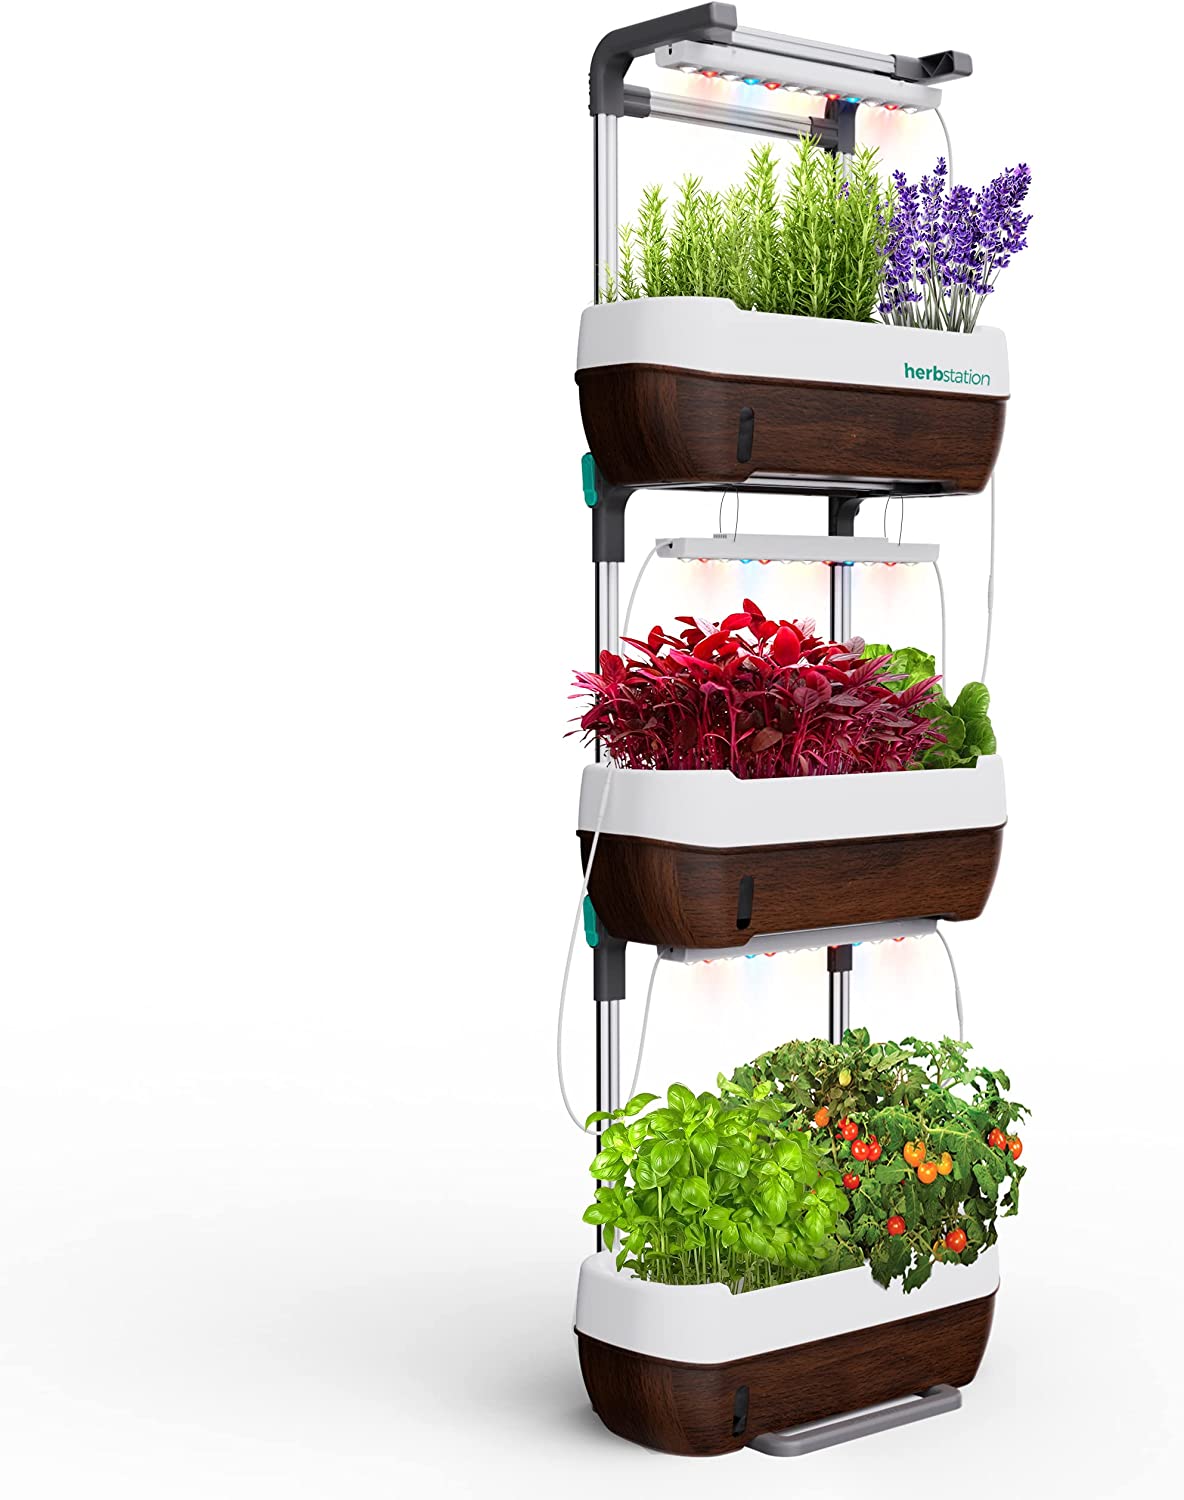 Self-Watering Systems